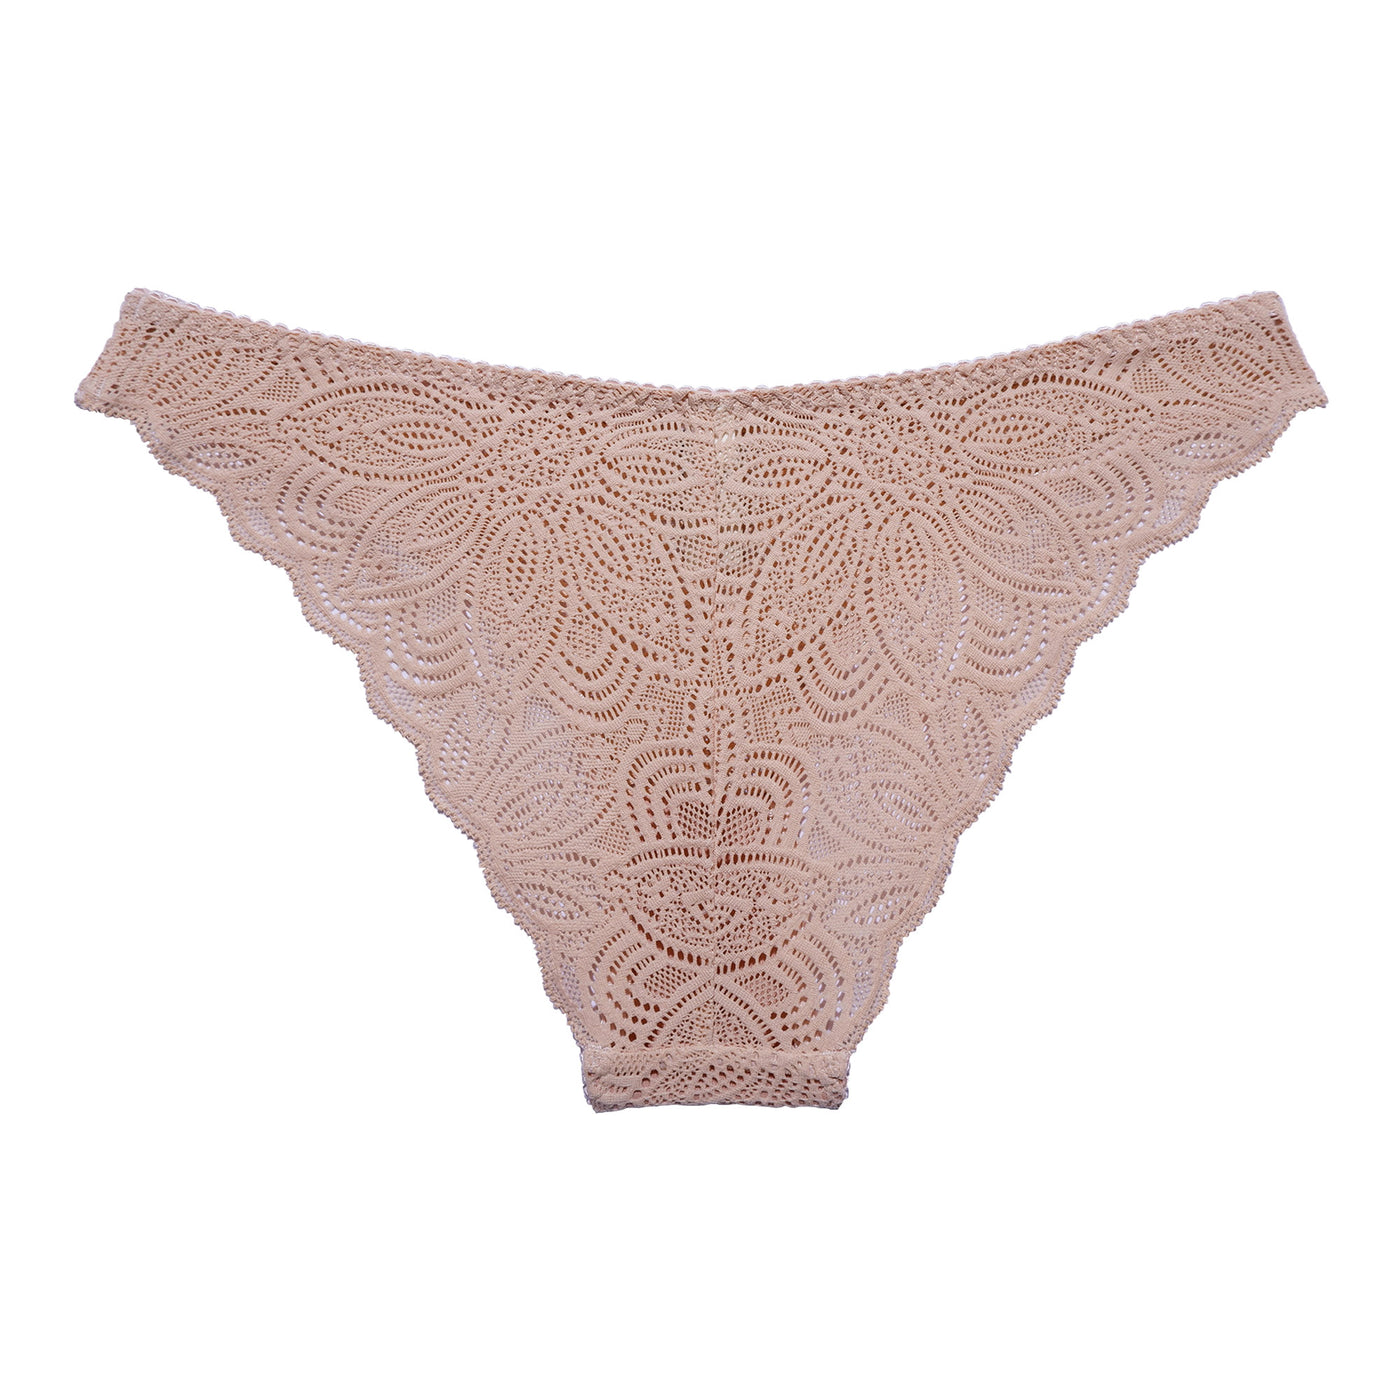 Our Luna Briefs are made in soft lace with delicate scalloped edges, for a light and romantic look.